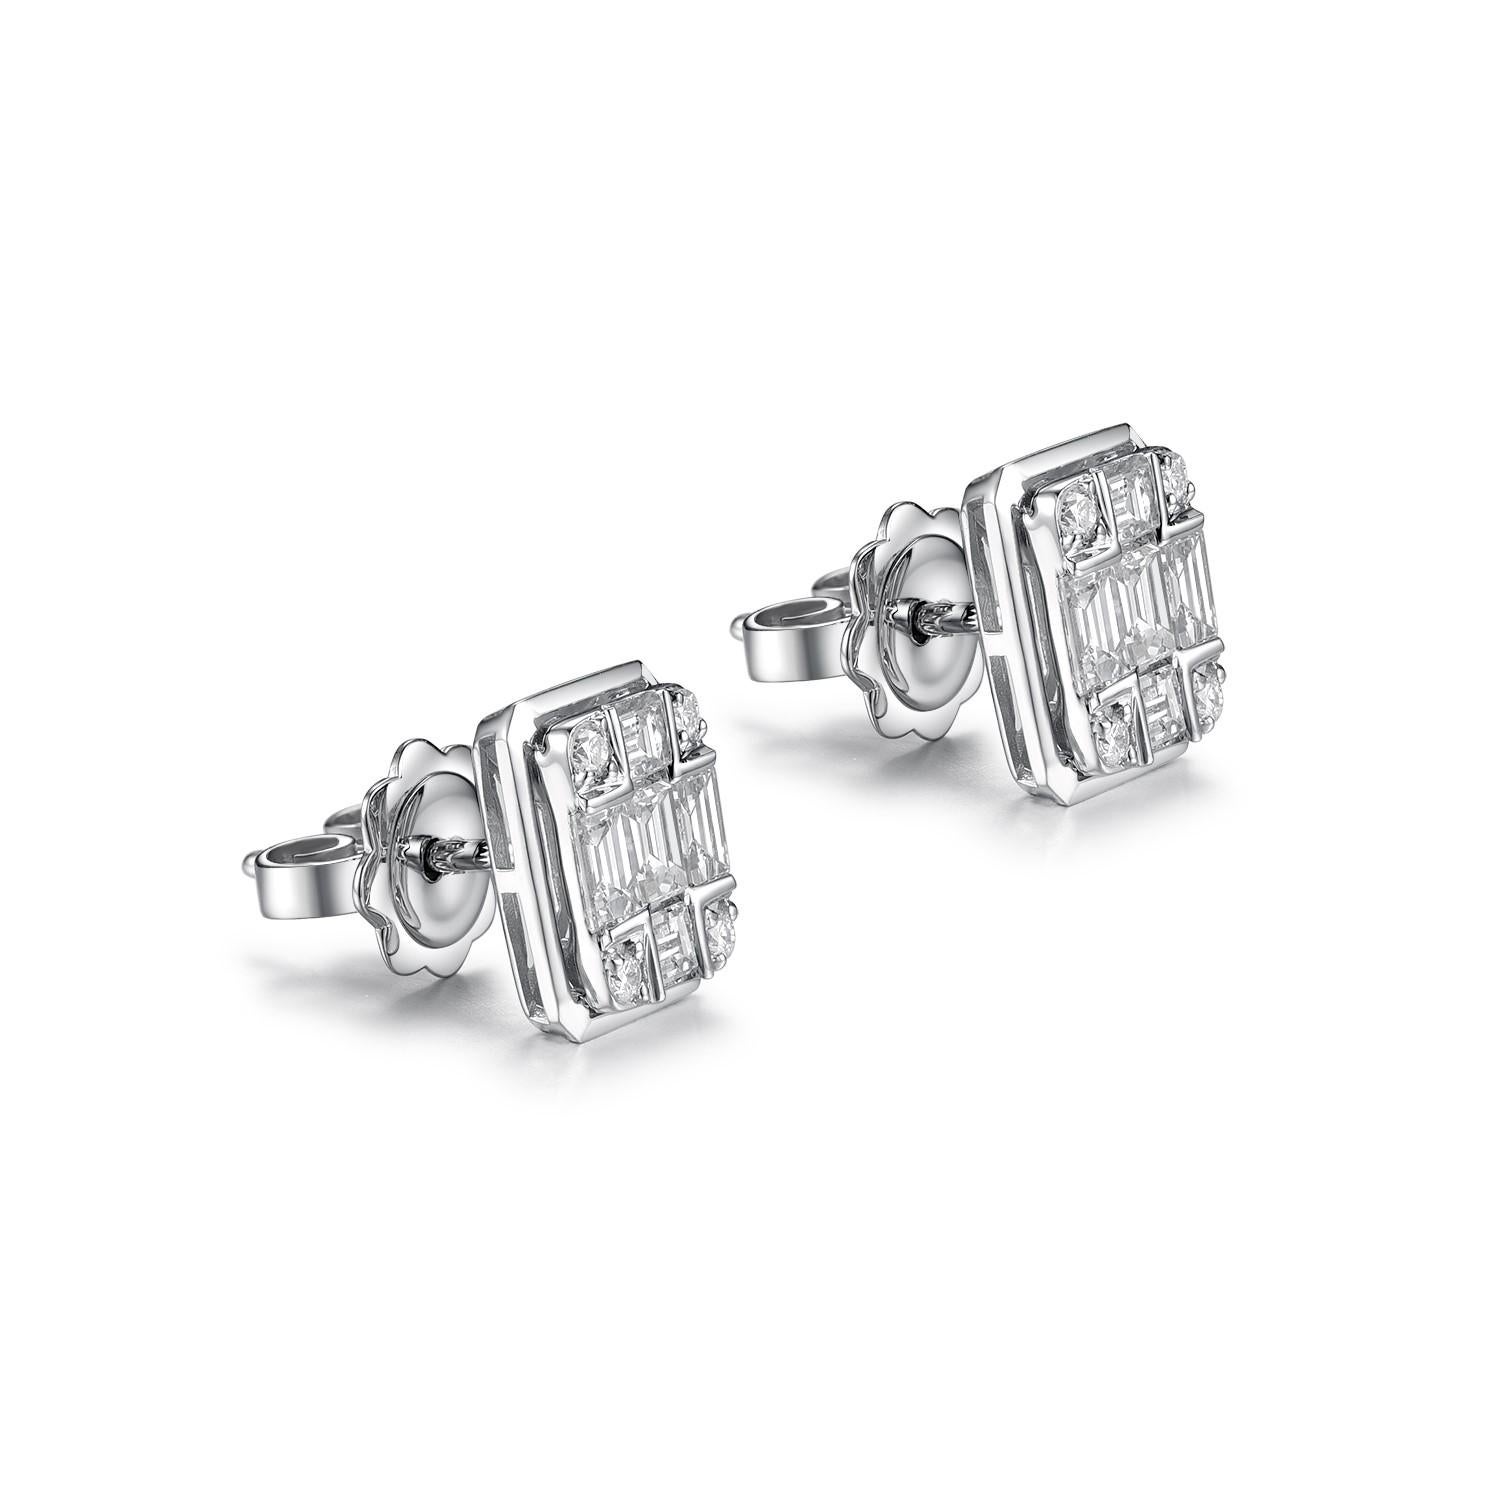 These stud earrings are a stunning creation, expertly crafted from 18K white gold to offer both durability and a sophisticated sheen. The design is modern yet timeless, featuring a geometric layout that showcases a skillful blend of diamond